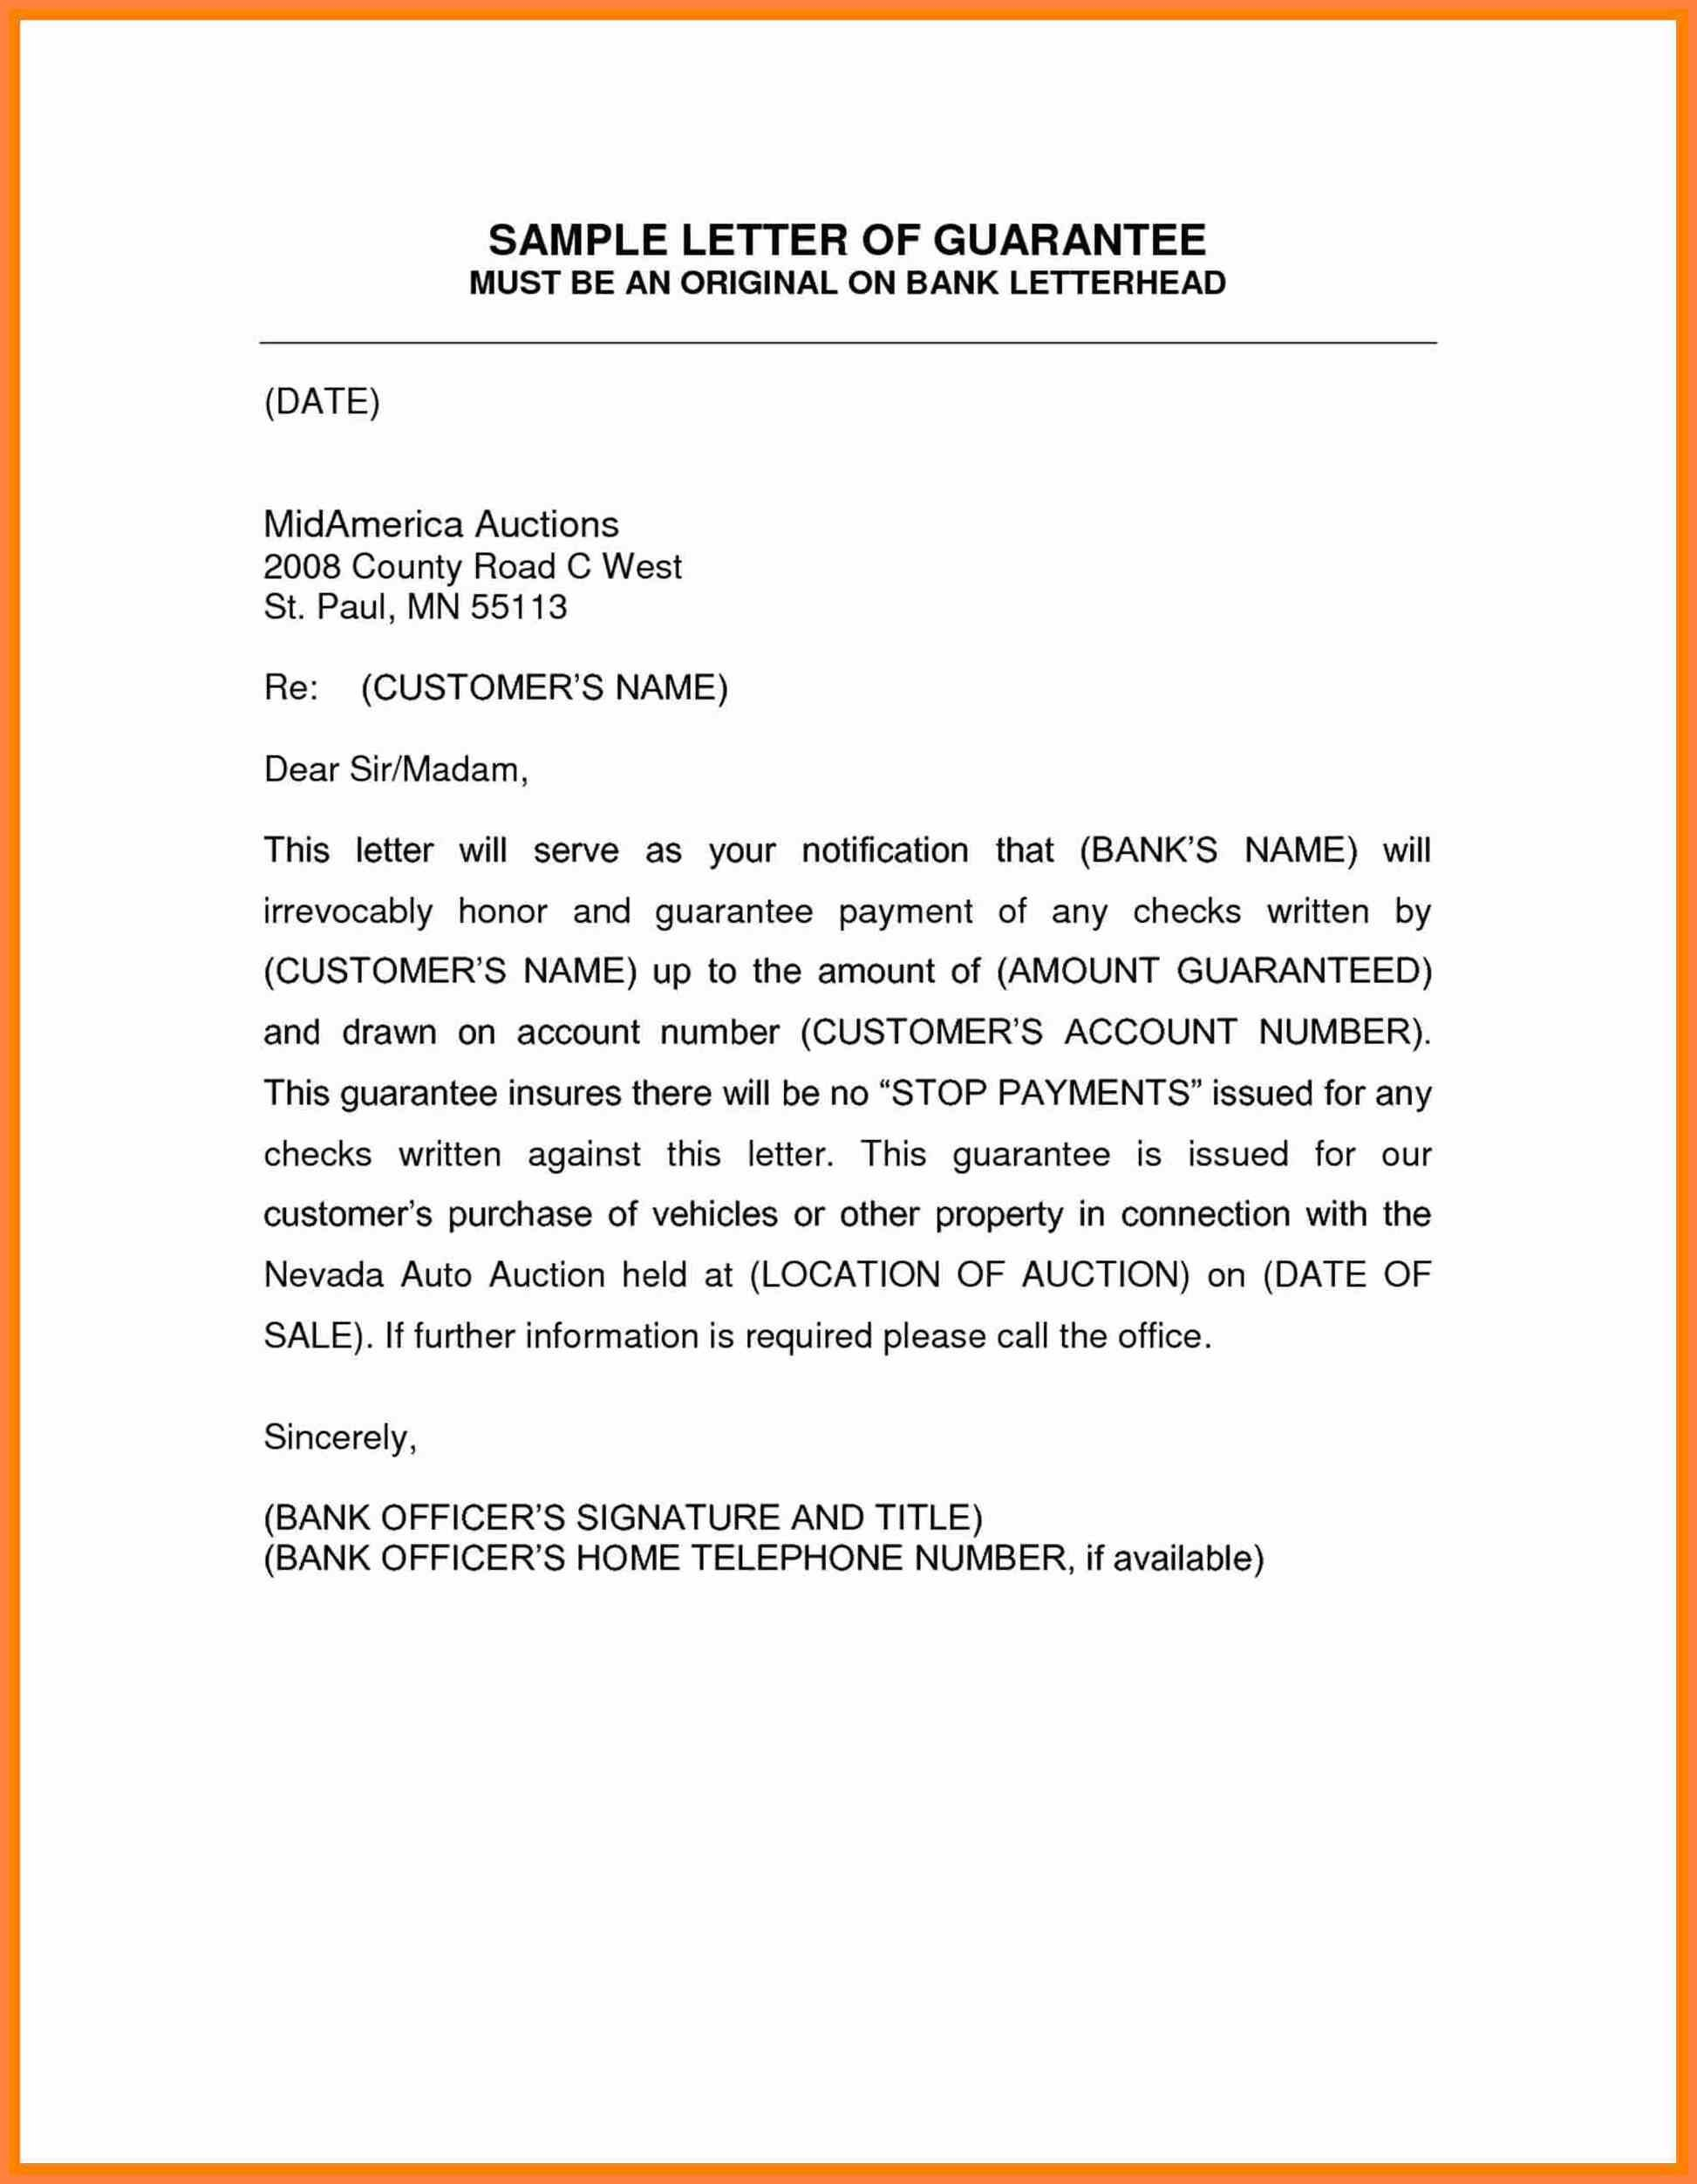 Sample Of Guarantor Letter  Corpus Beat intended for Letter Of Guarantee Template